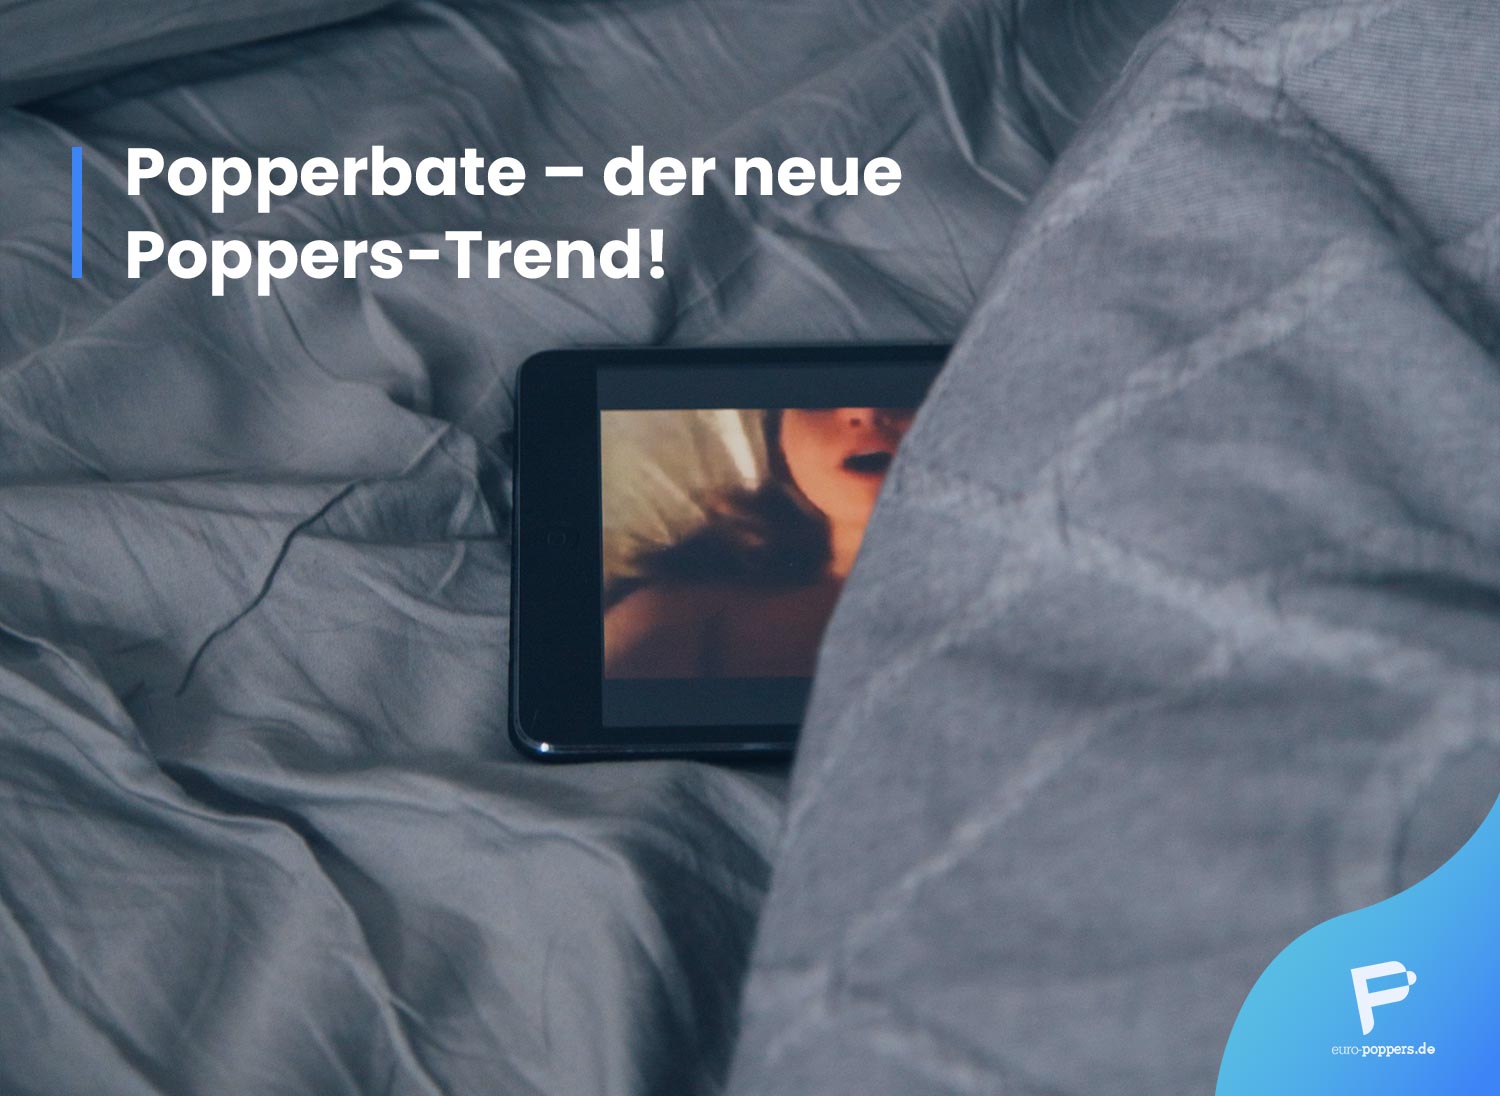 You are currently viewing Popperbate – der neue Poppers-Trend!